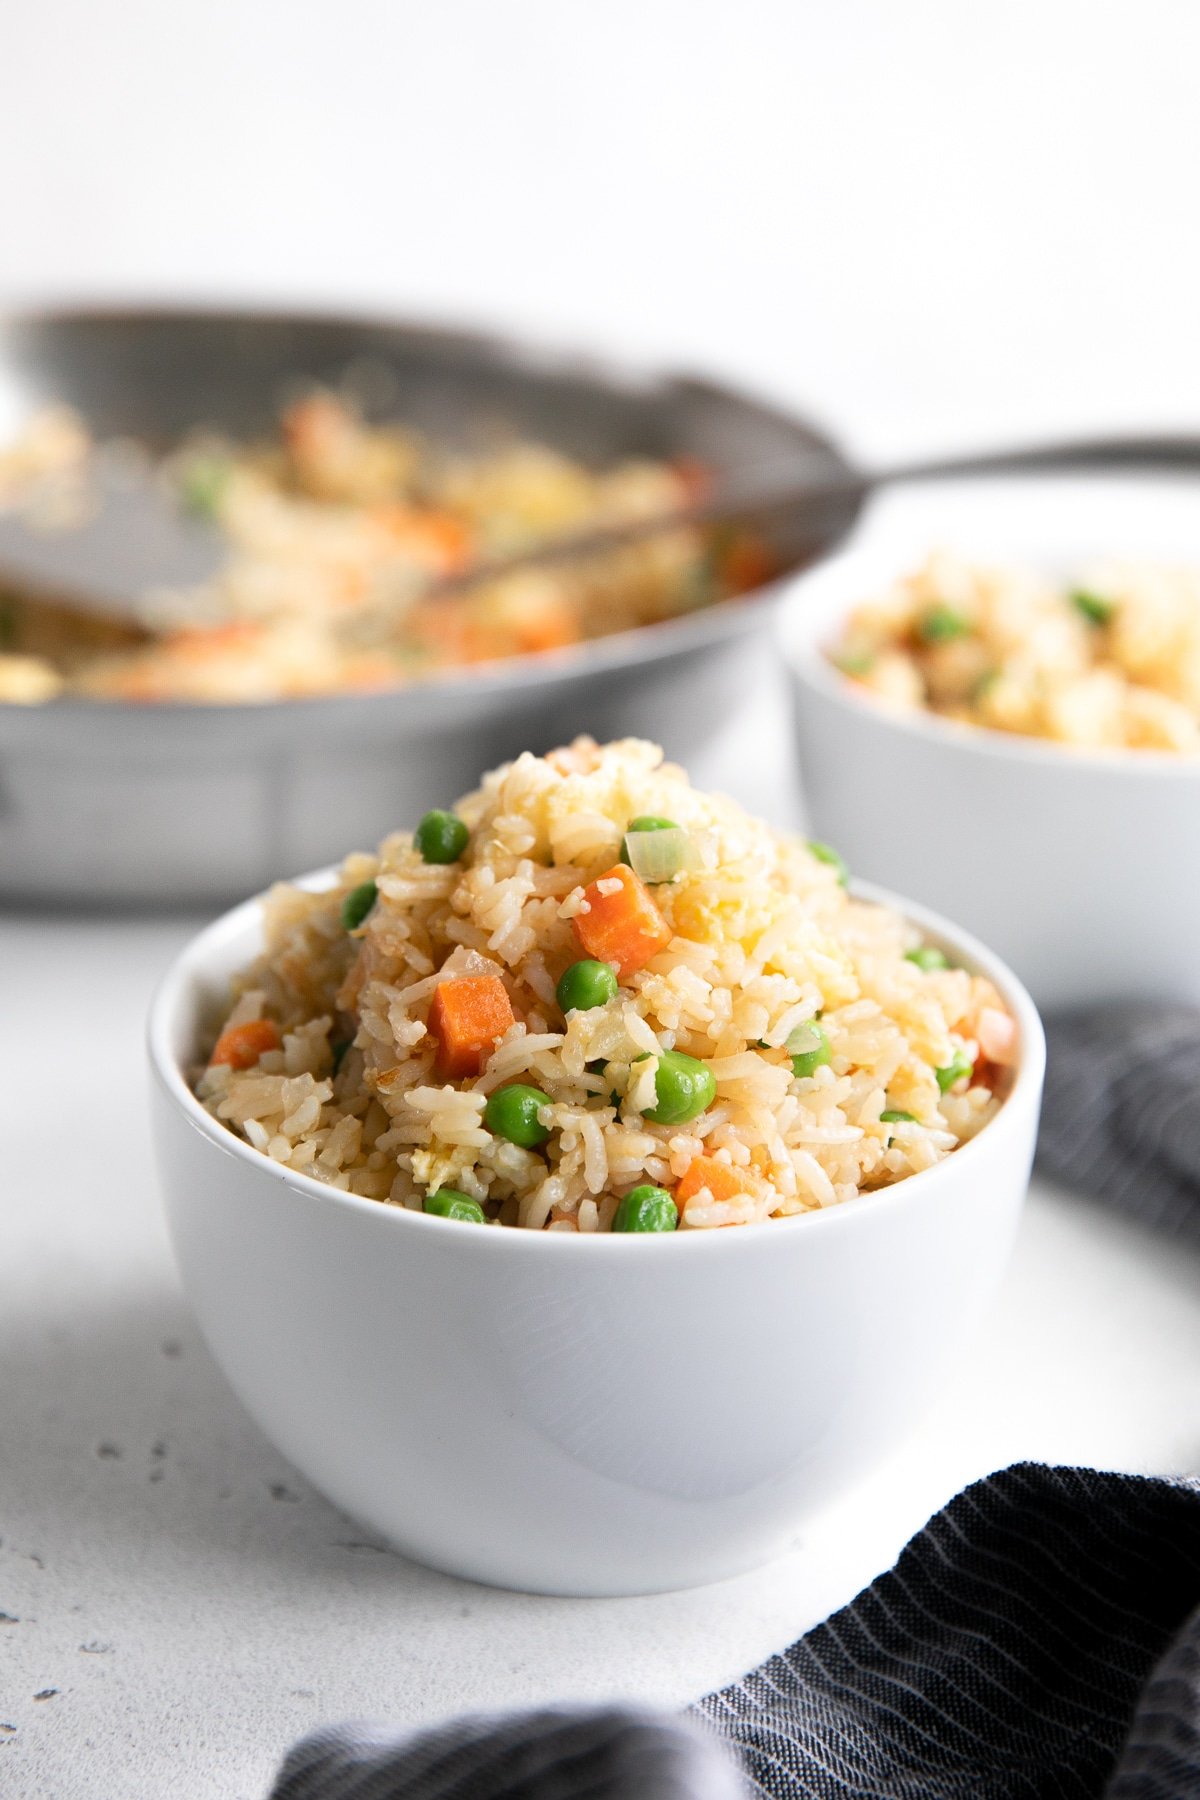 Small white bowl filled with fried rice.